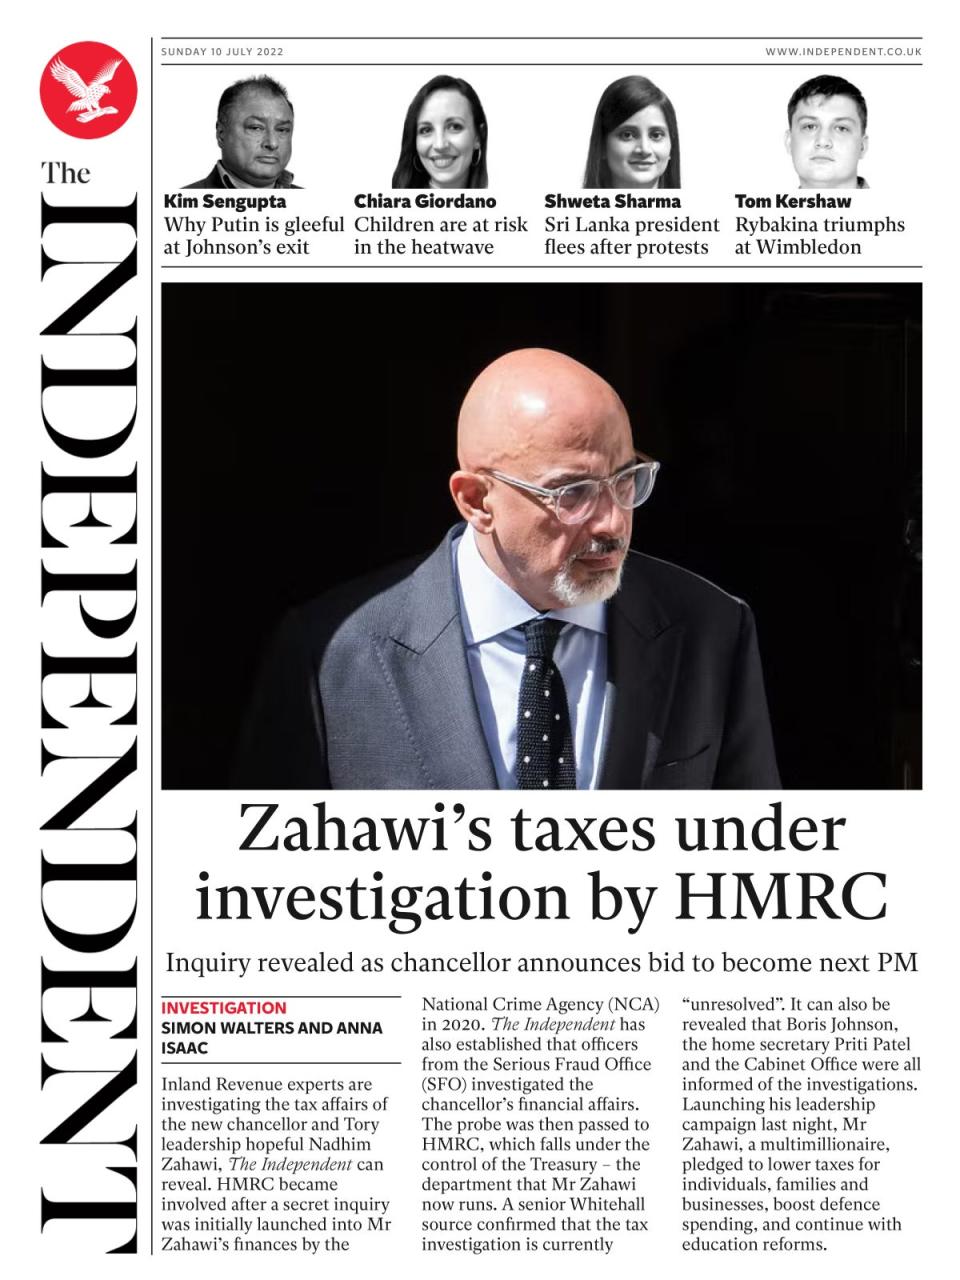 Mr Zahawi tried to stop this publication exposing the investigation by threatening to sue if we published (The Independent)